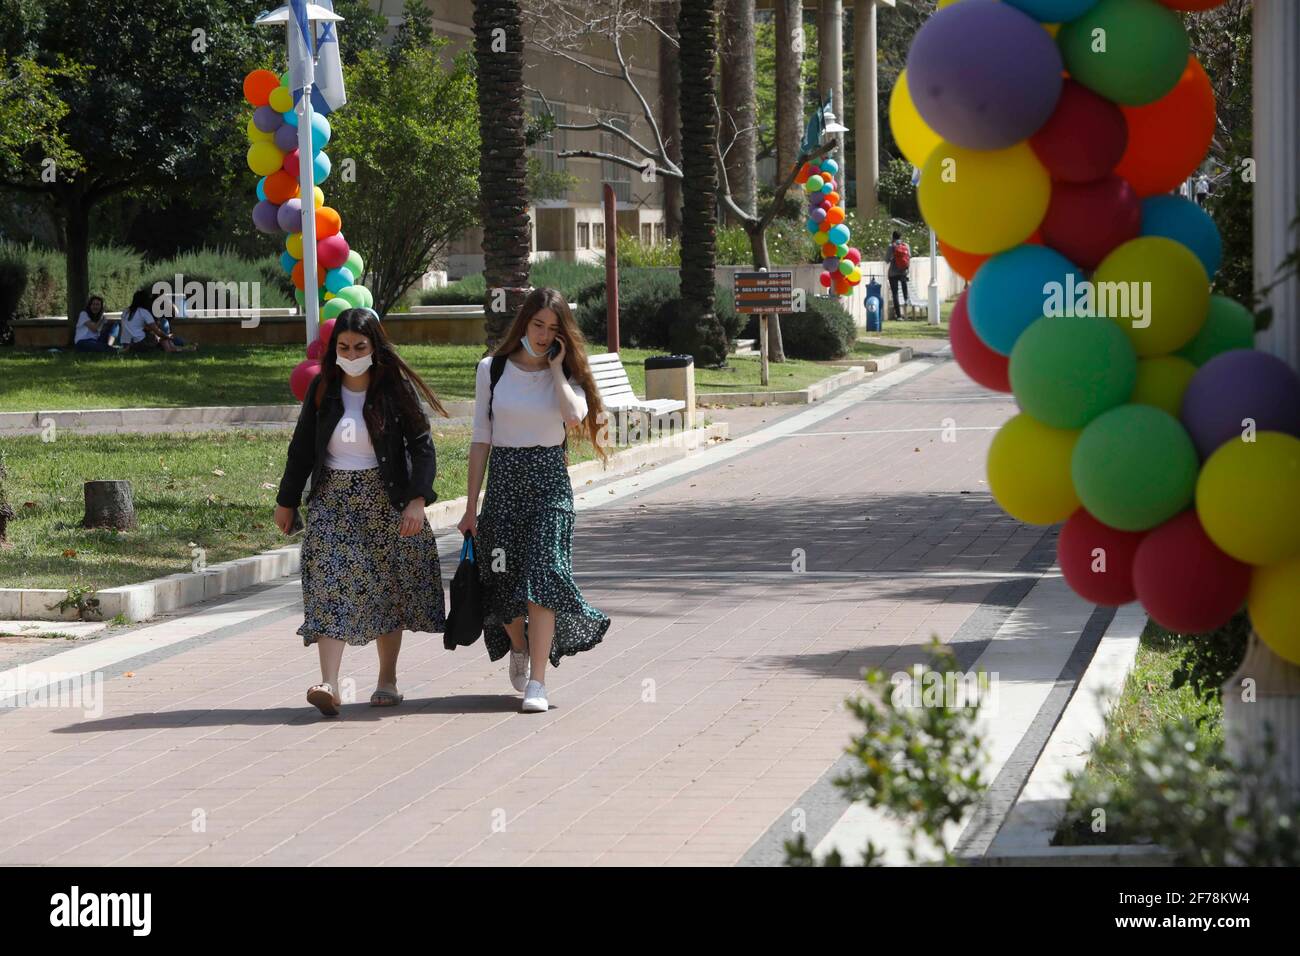 Ramat Gan. 10th Dec, 2020. Students walk in the campus at Bar Ilan University at central Israeli city of Ramat Gan on April 5, 2021. Israel's Ministry of Health reported 353 new COVID-19 cases on Monday, raising the total infections in the country to 834,563. The number of patients in serious conditions decreased from 344 to 323, out of the 489 hospitalized patients. This is the lowest number of patients in serious conditions in Israel since Dec. 10, 2020 when it stood at 320. Credit: Gil Cohen Magen/Xinhua/Alamy Live News Stock Photo